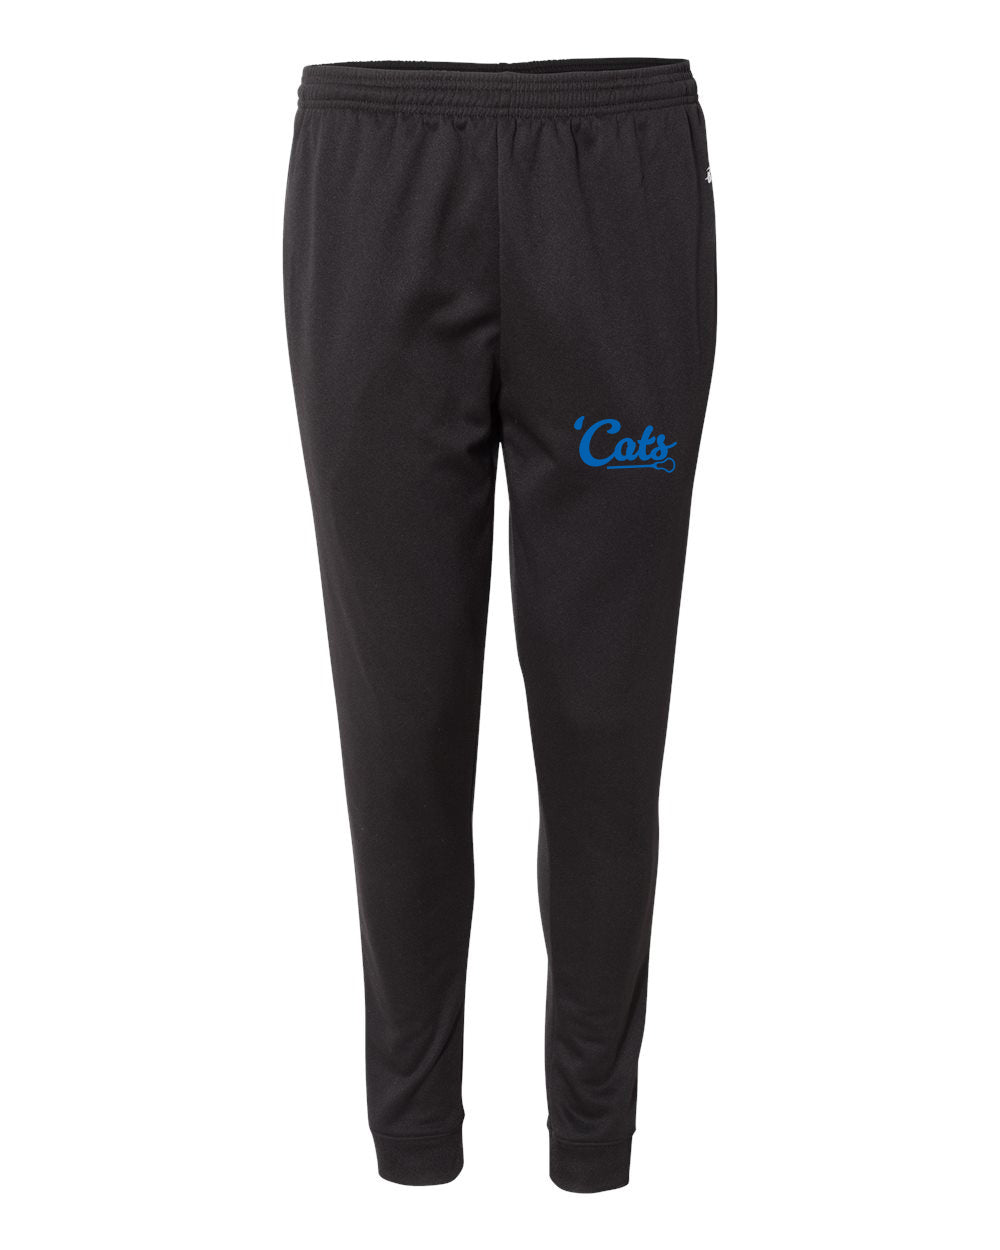 Suffield High Lacrosse  - Adult Joggers "Cats/Stick" - 1475 (color options available)